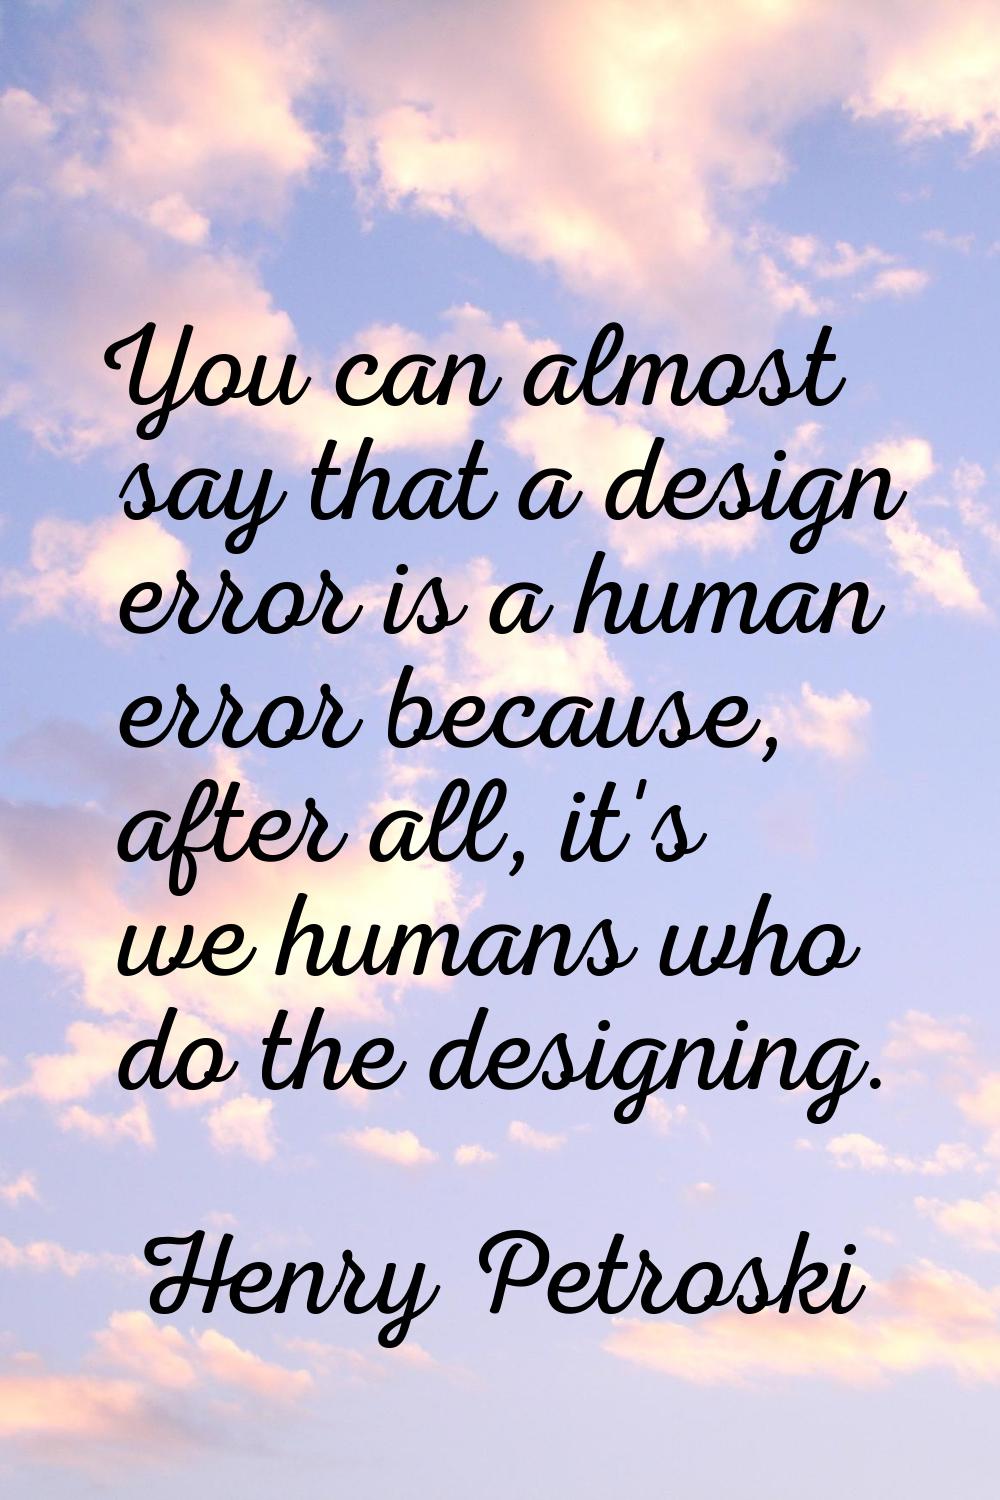 You can almost say that a design error is a human error because, after all, it's we humans who do t